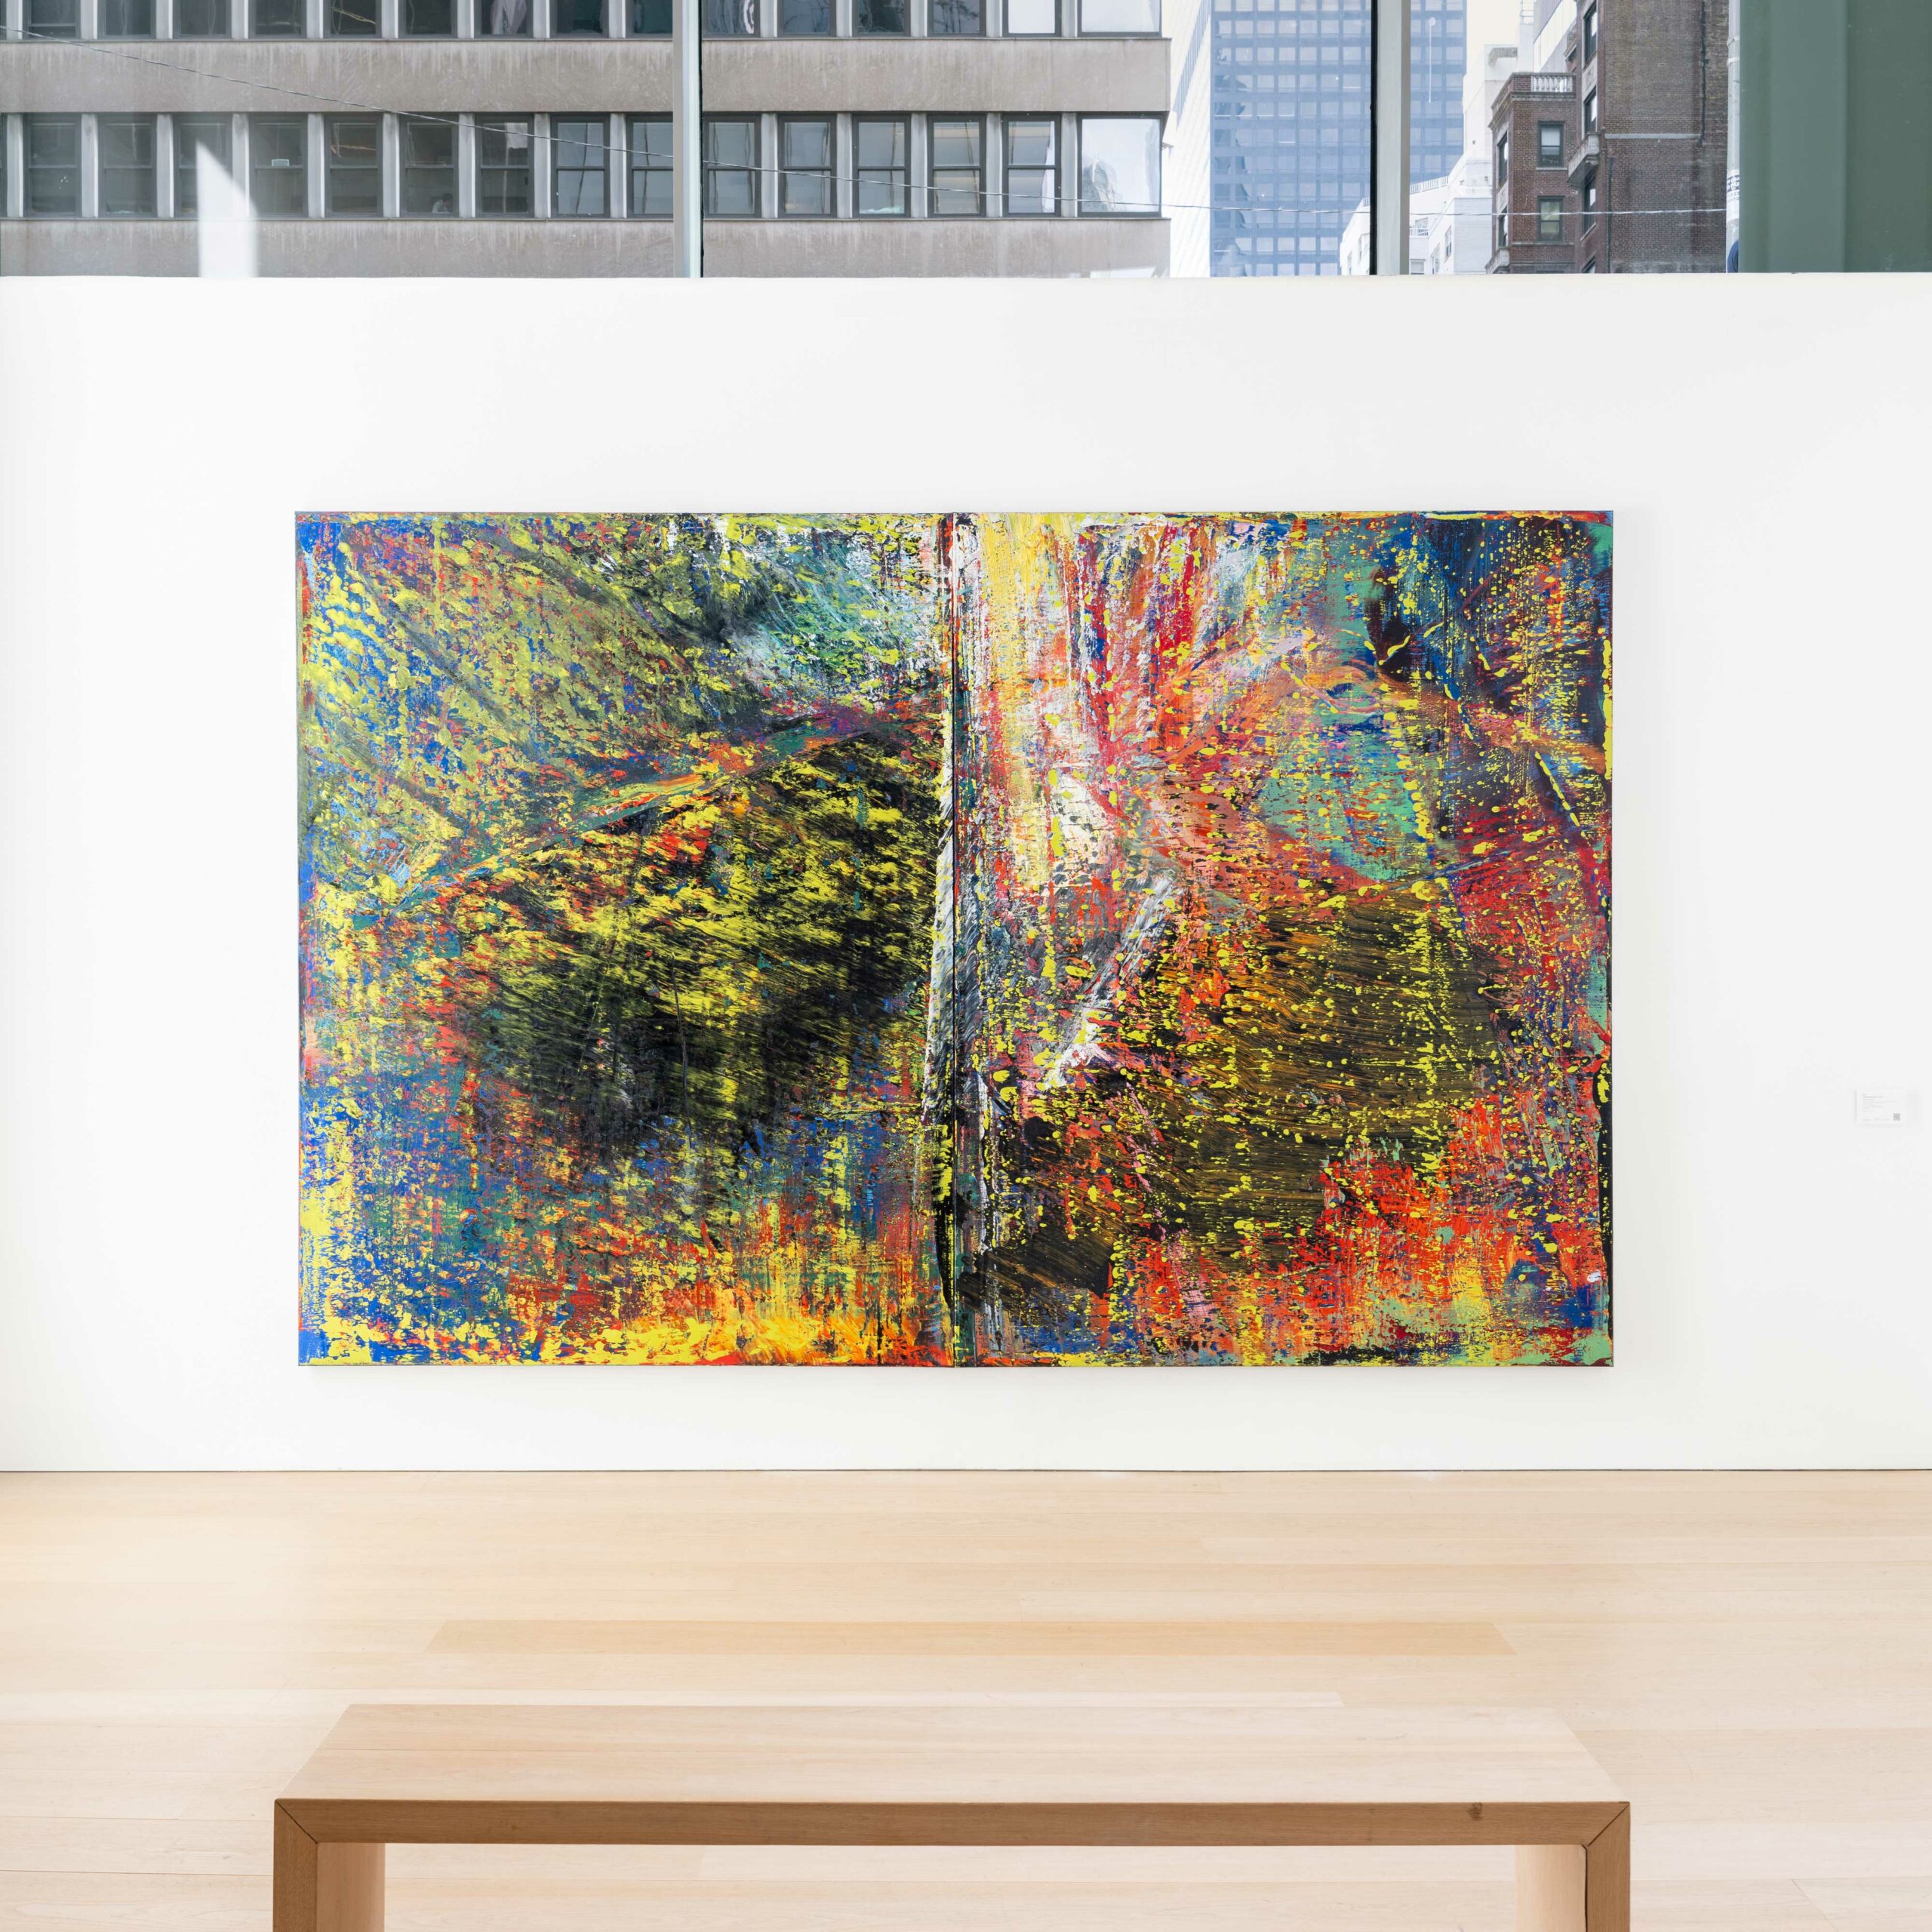 Exhibition view of a large abstract colorful painting by Gerard Richter.